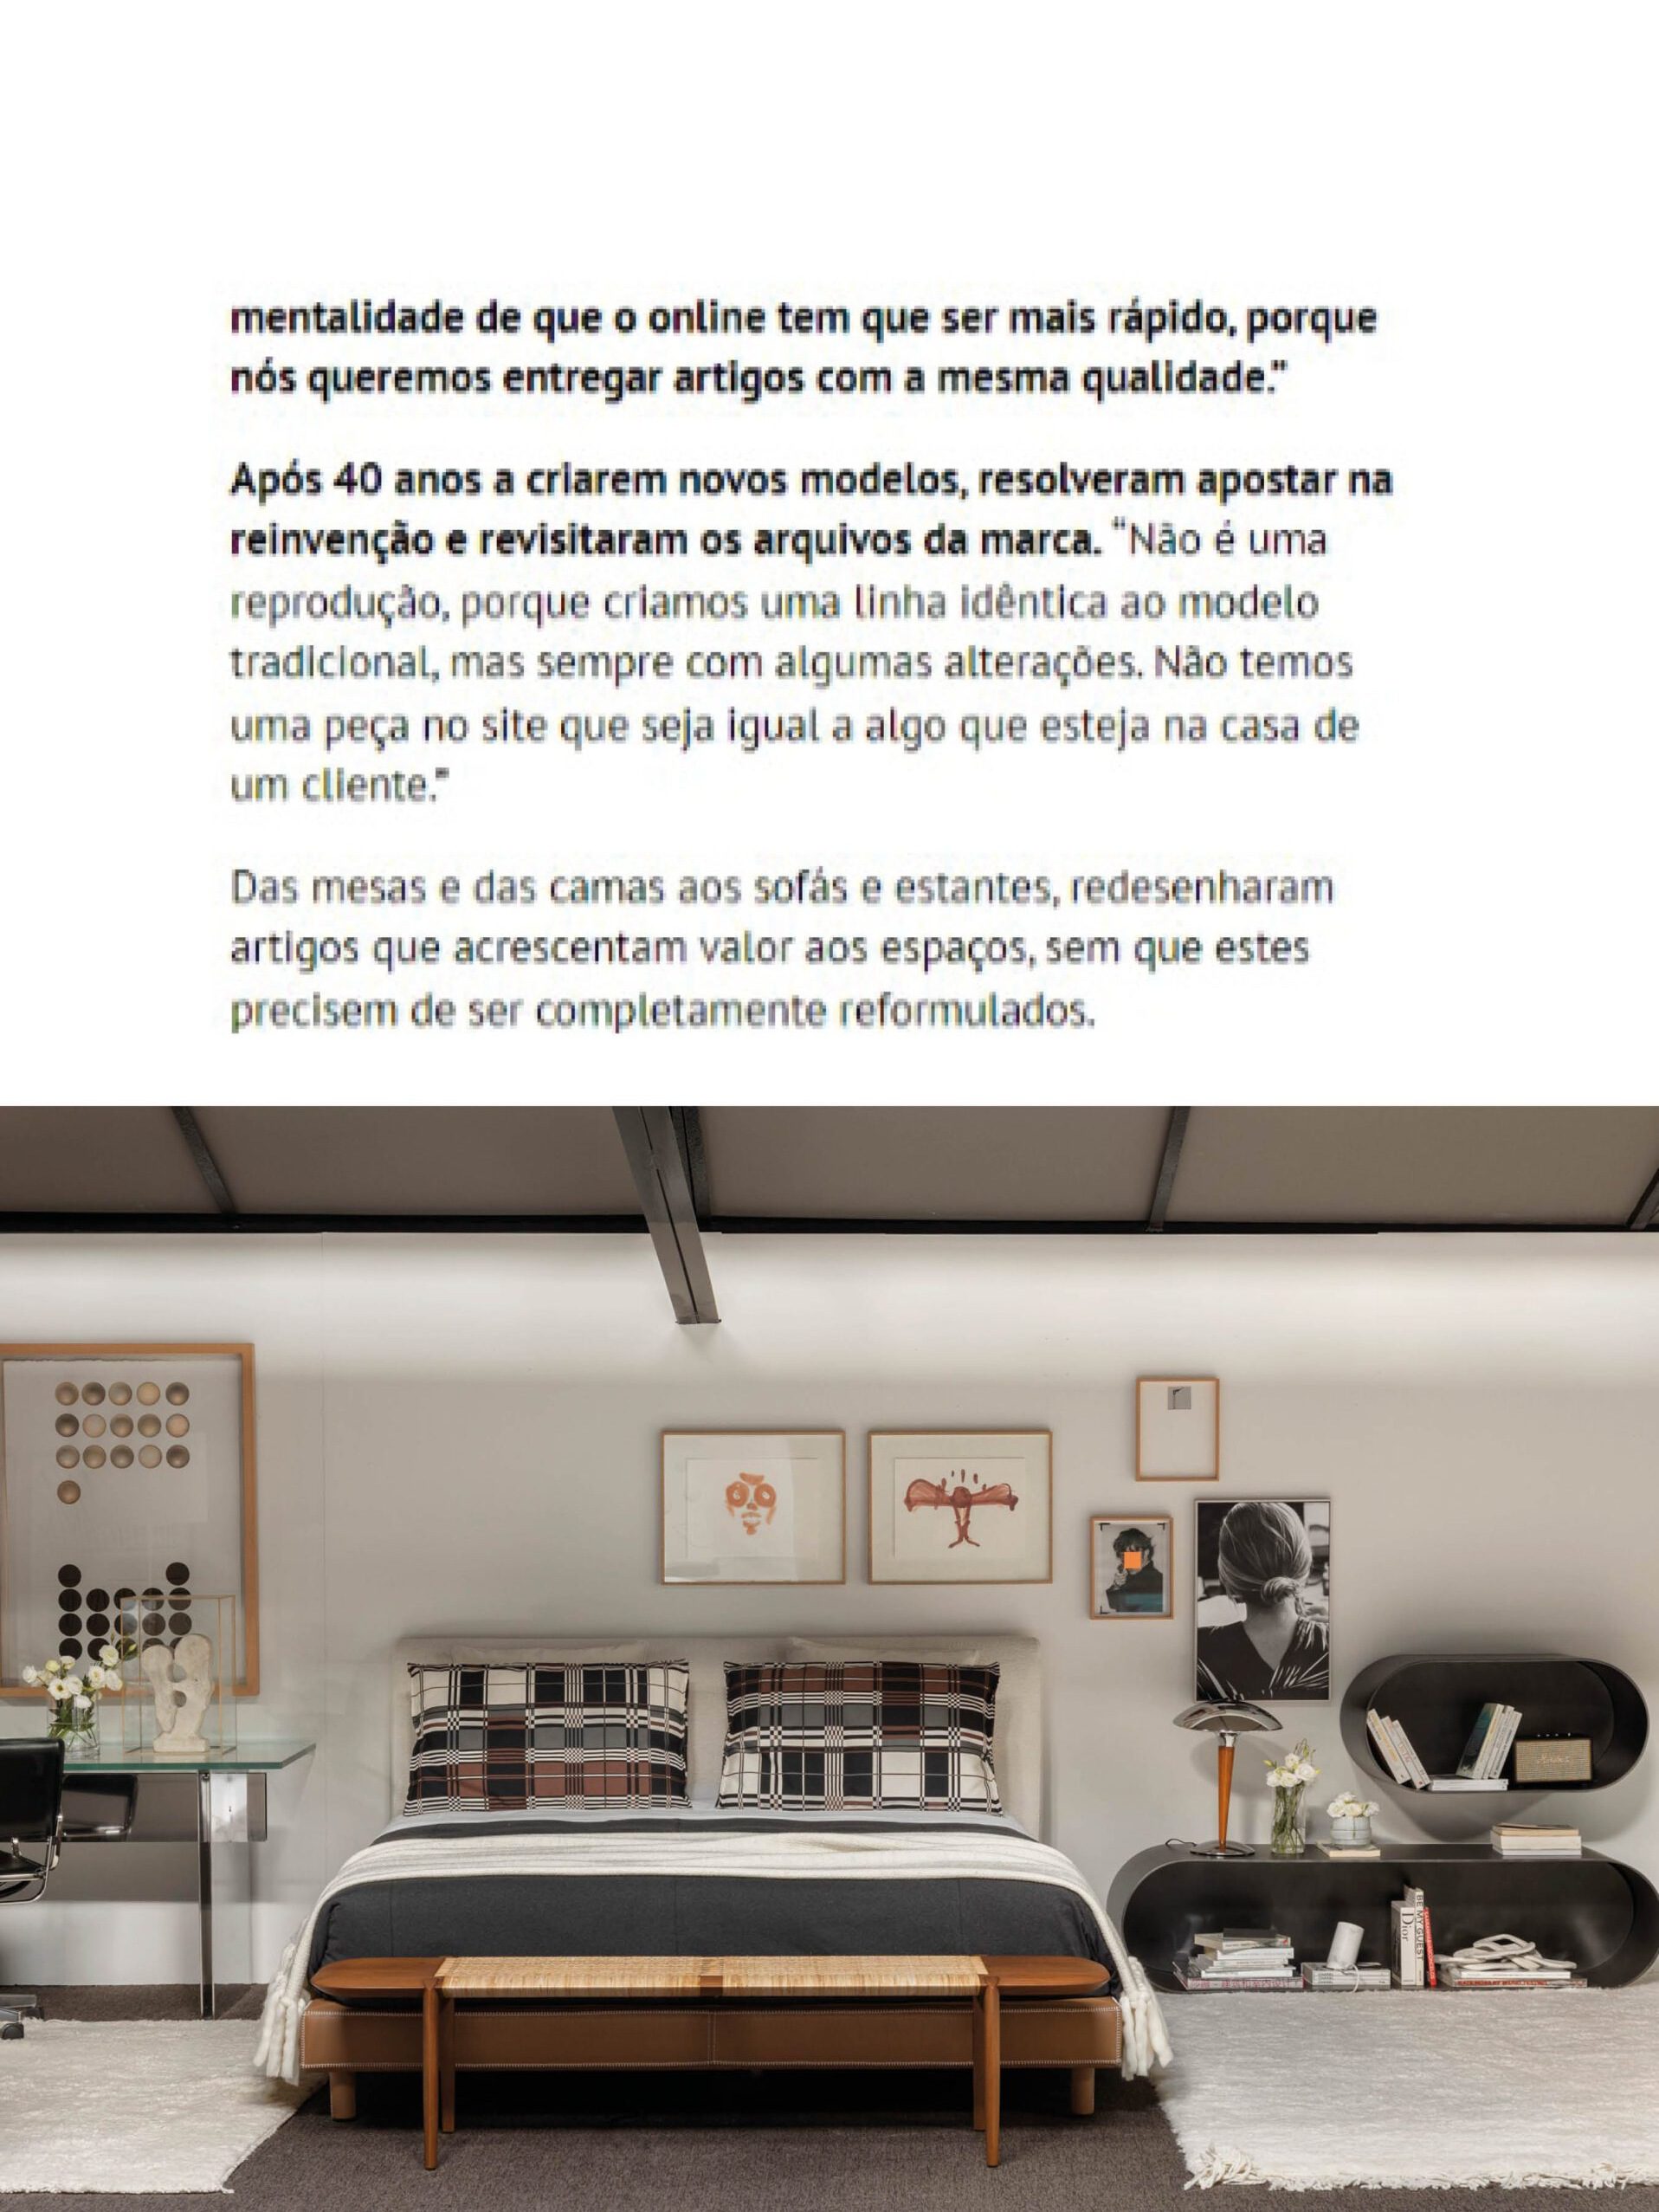 SAV nit november review design architecture project luxury interview showroom deco opened in 1985 project yellow online shop partners rosário tello carmo aranha francisca perestrelo ana camões 40 pieces furniture collection lifestyle